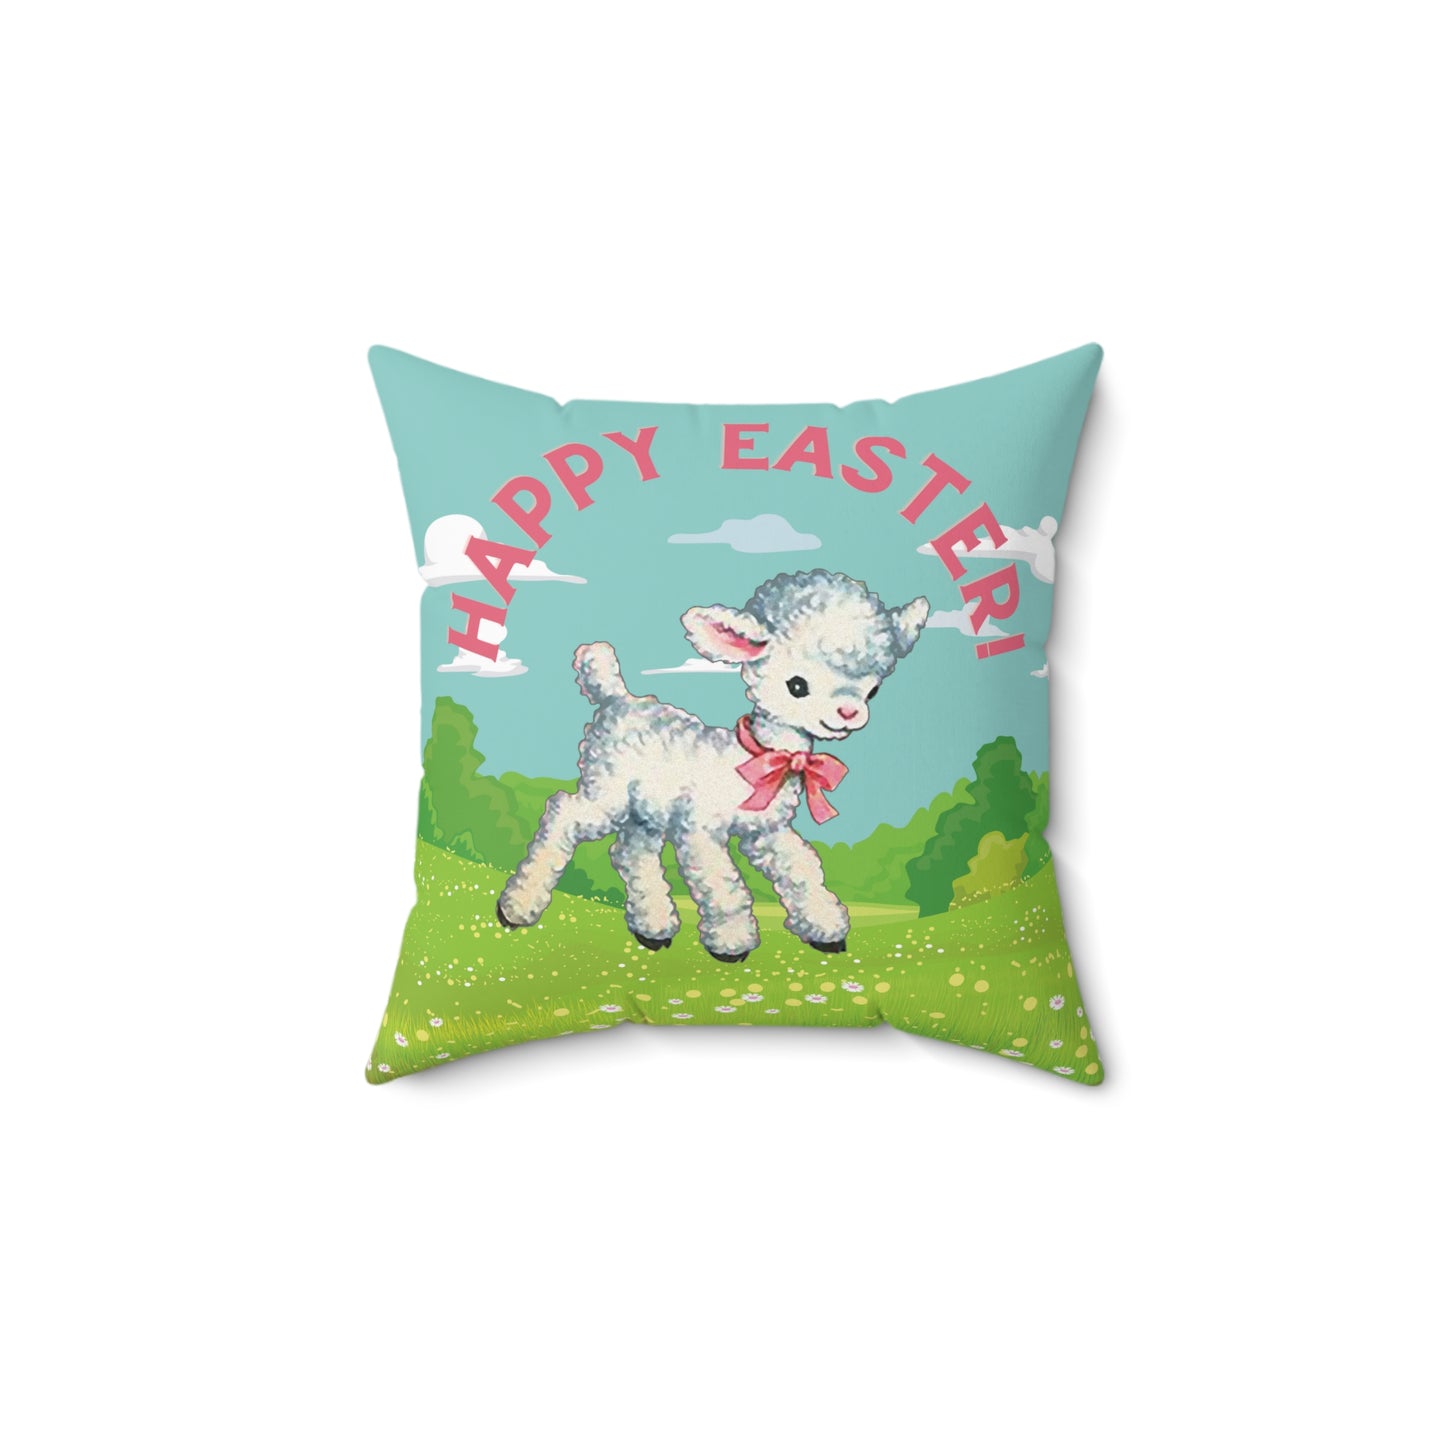 Retro Easter Lamb, Vintage Mid Century Mod Inspired Colorful Happy Easter Accent Throw Pillow